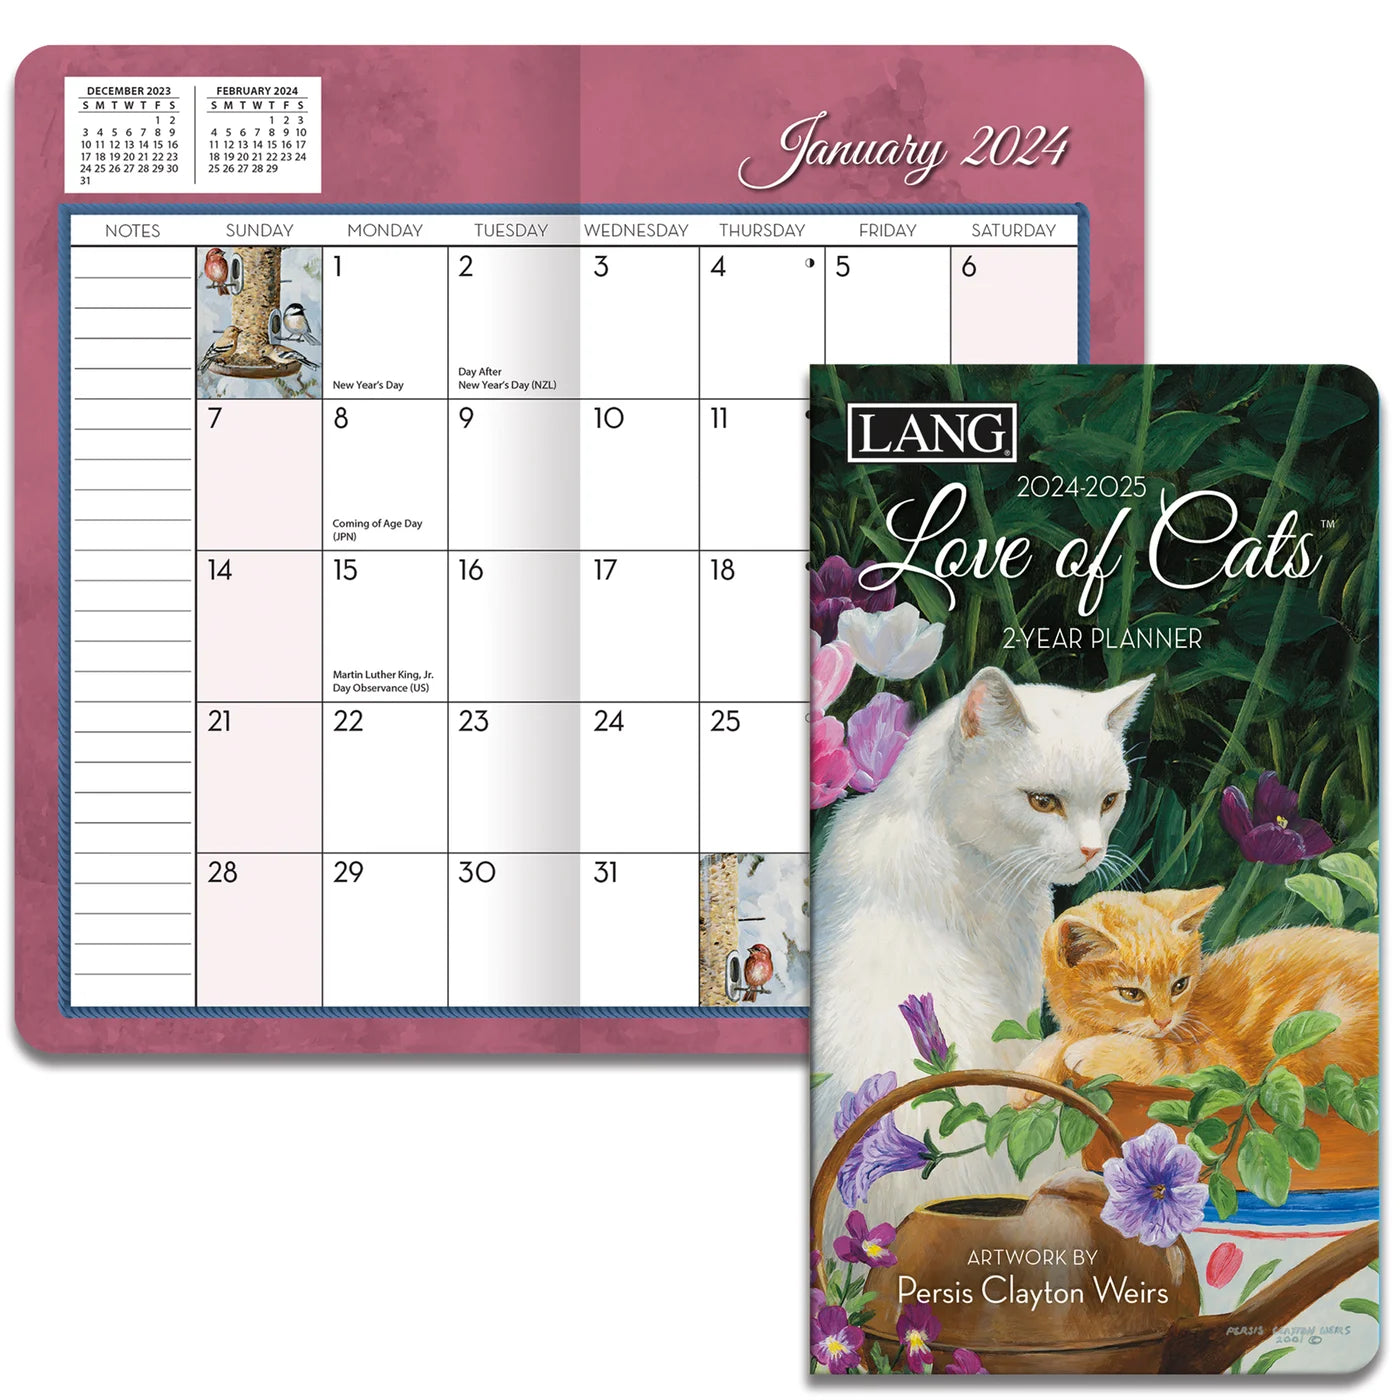 Lang 2-Year Planner - Love of Cats – Kimco for the Home